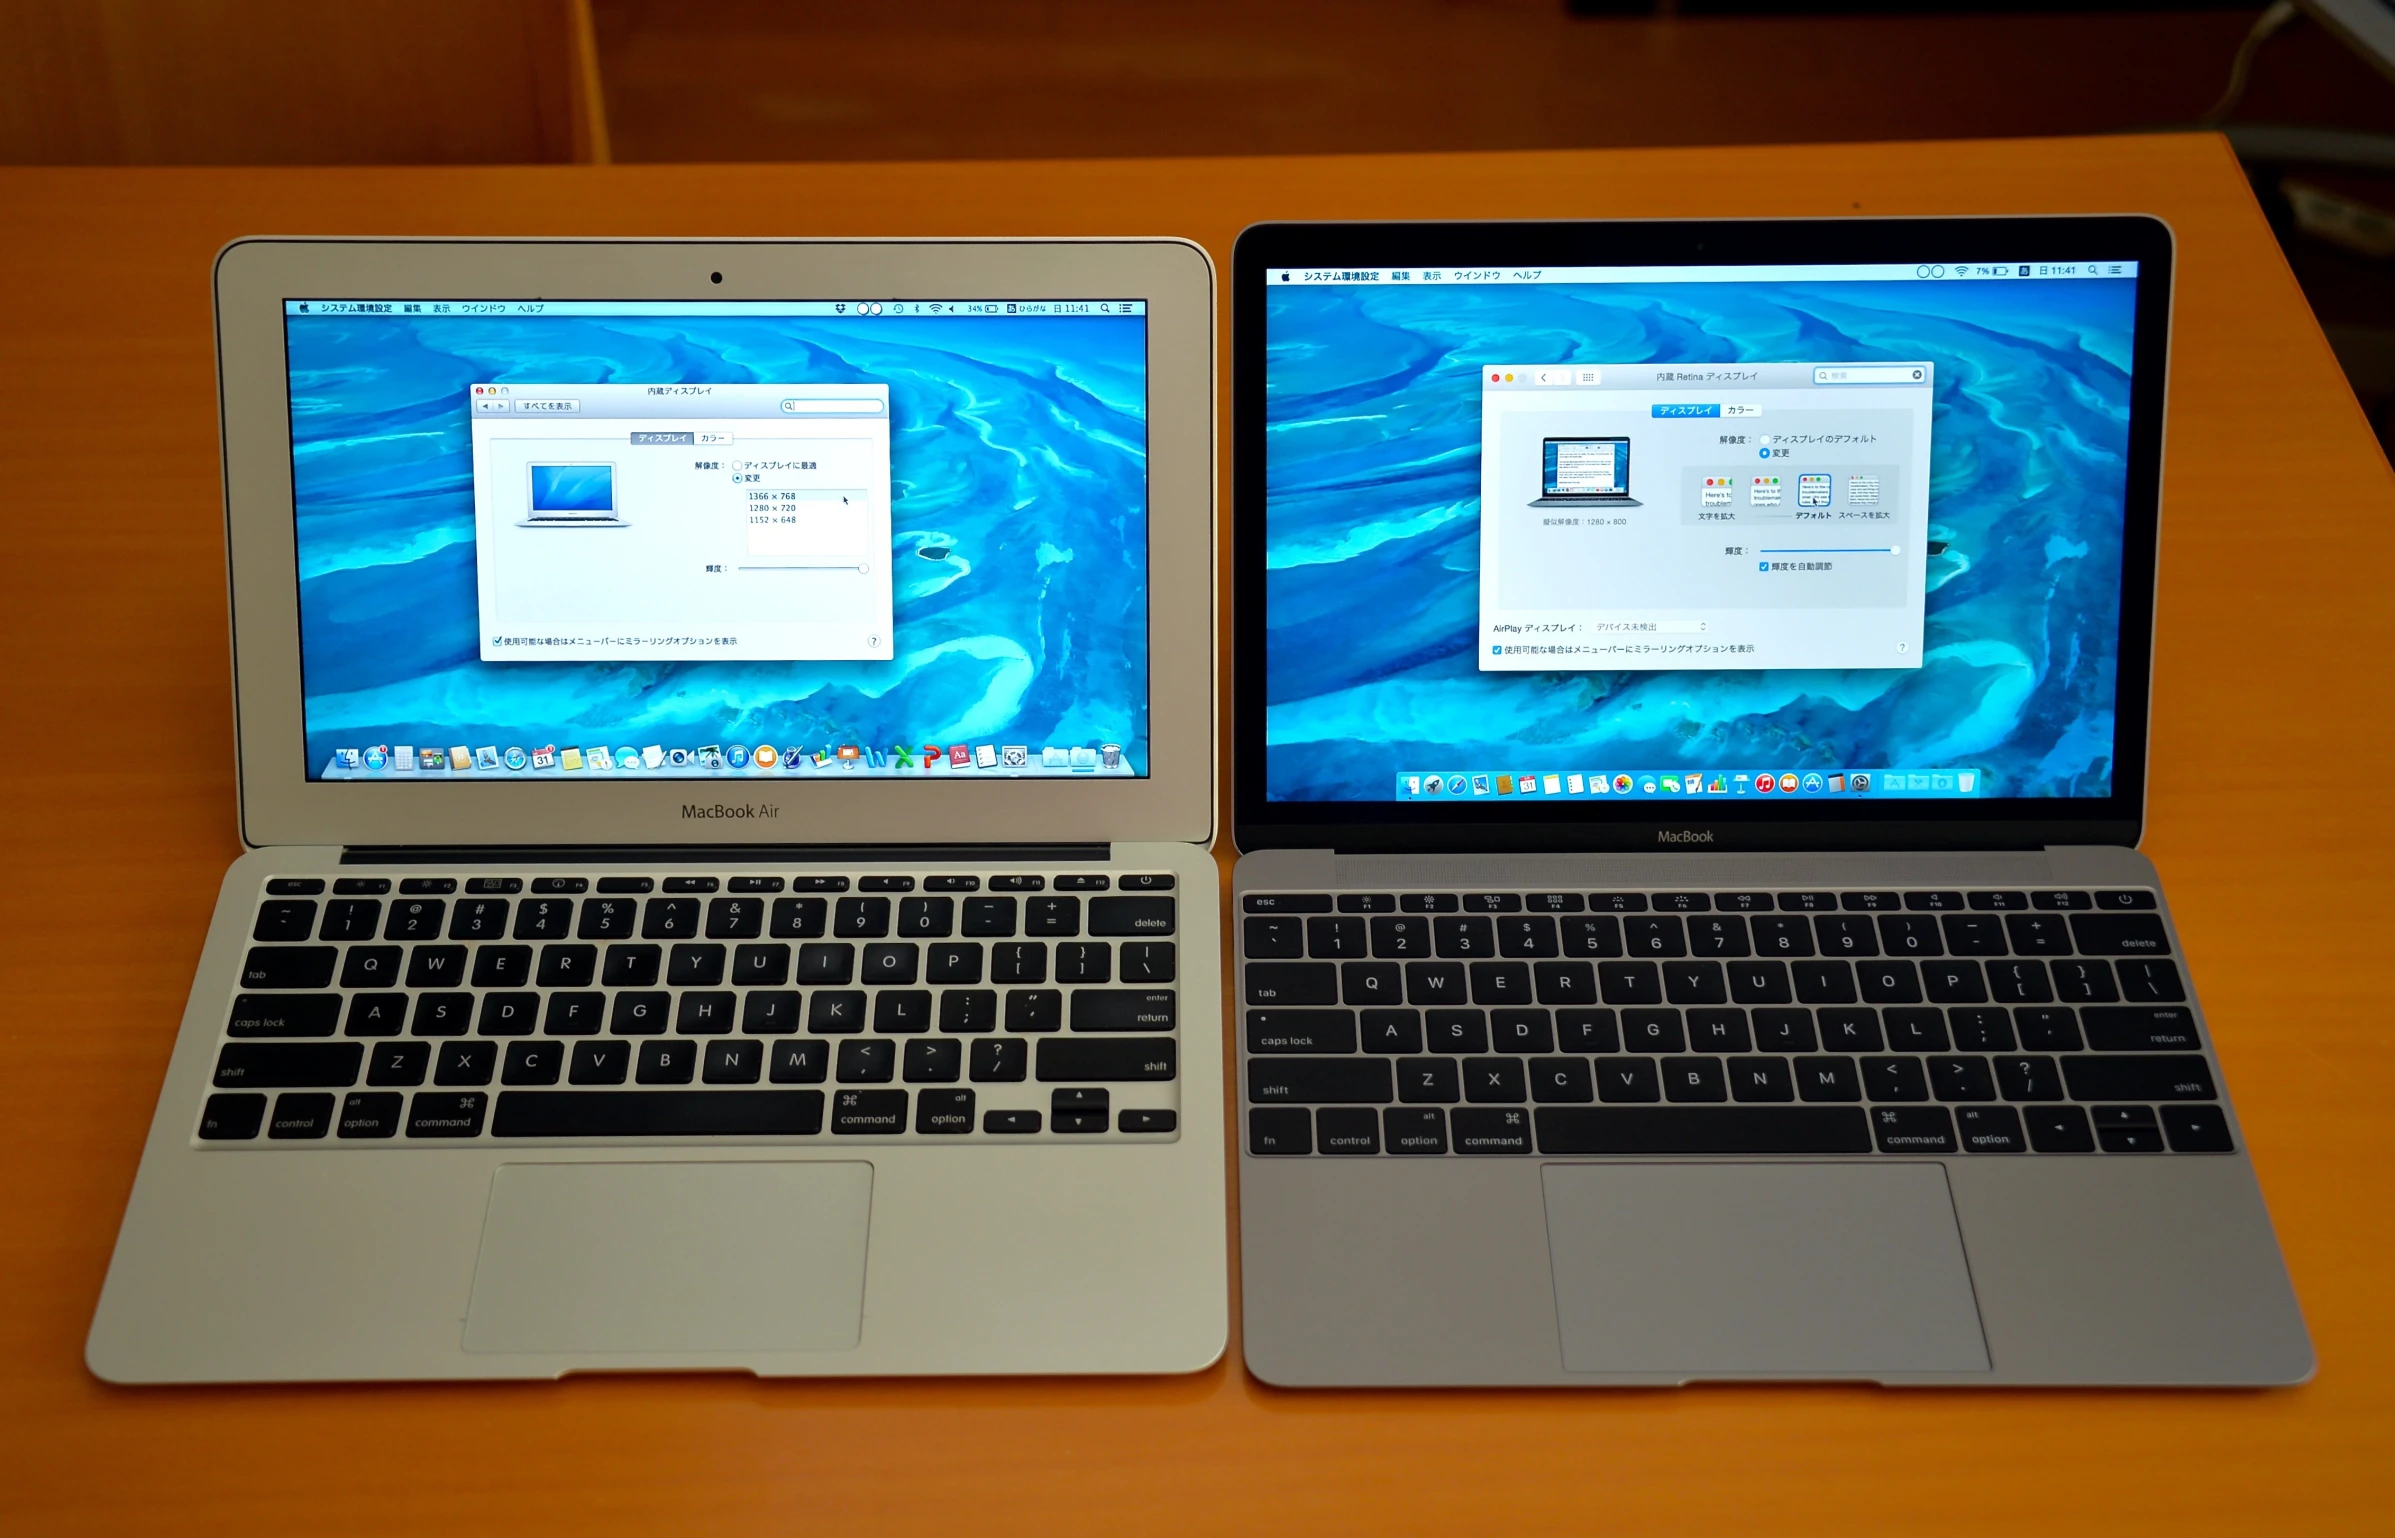 two mac laptop computers side by side on a table